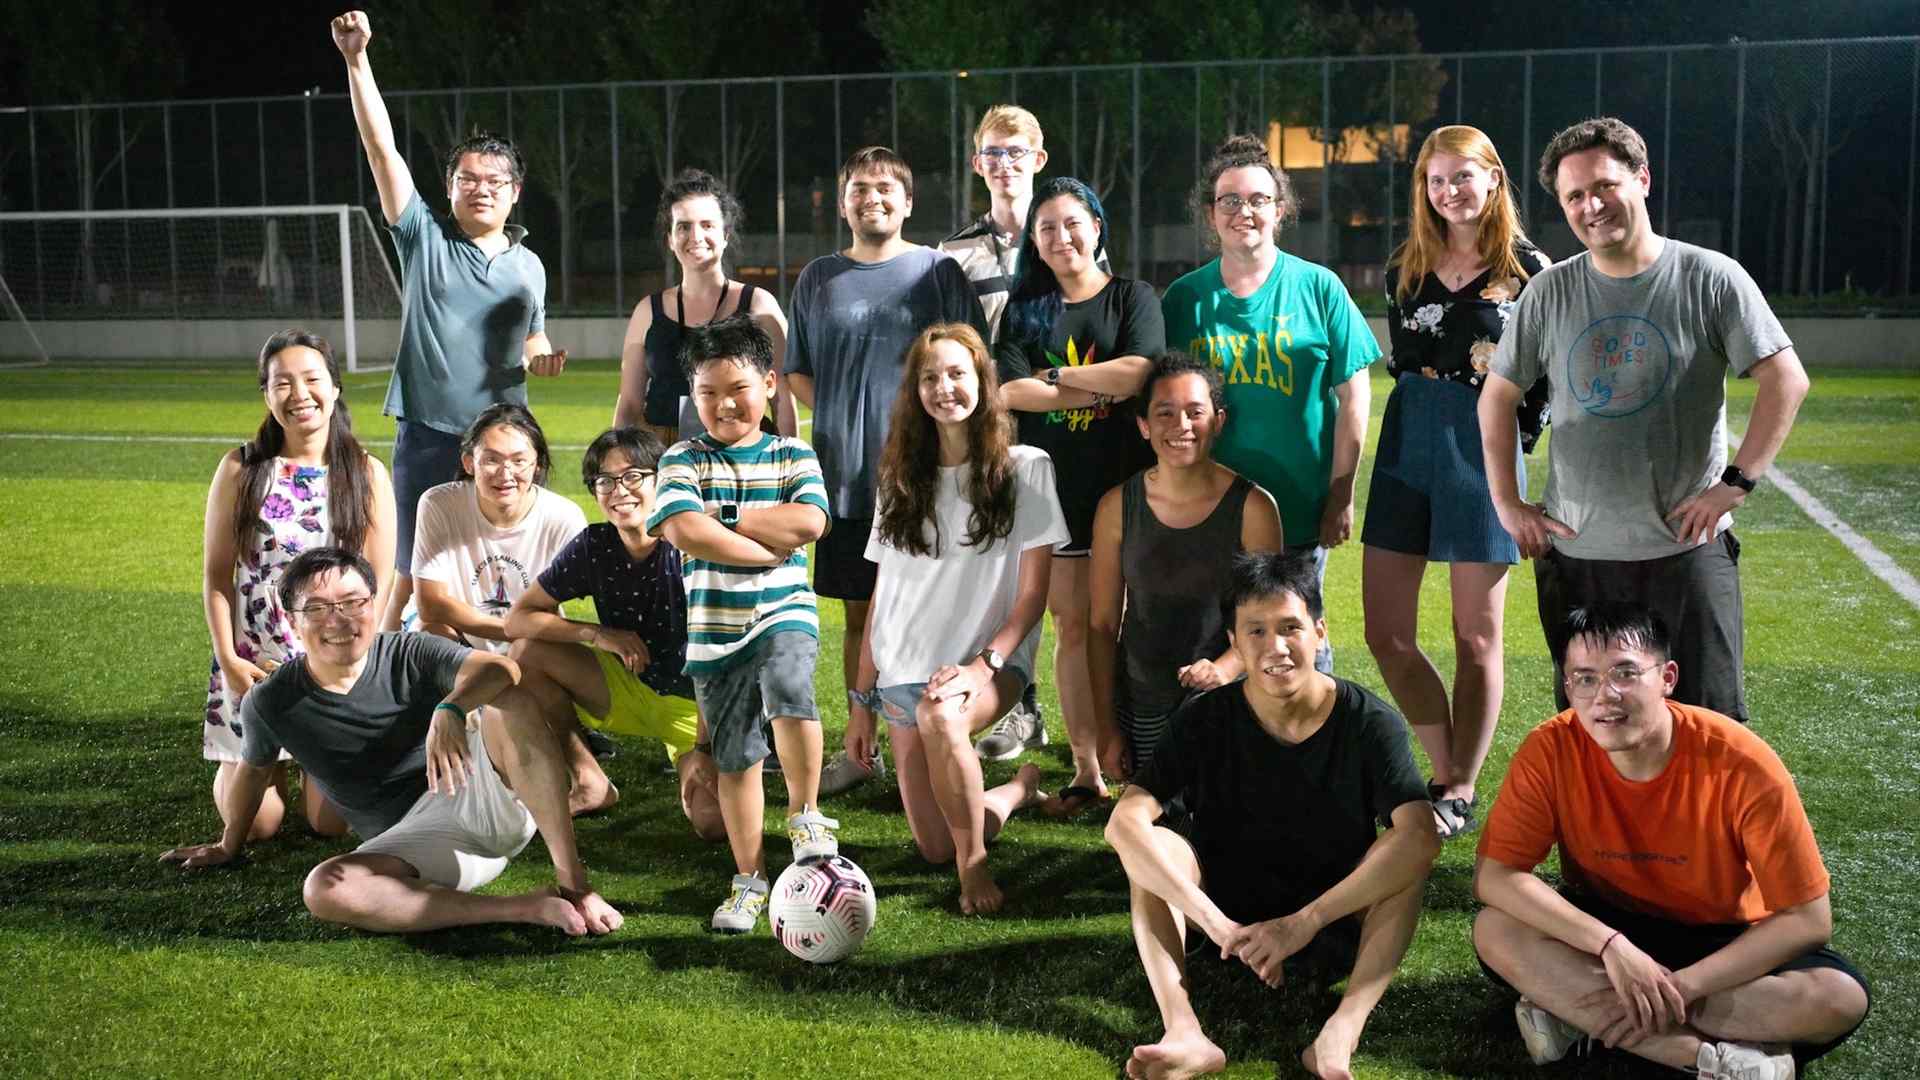 Students posing for a group photo in a field after playing soccer